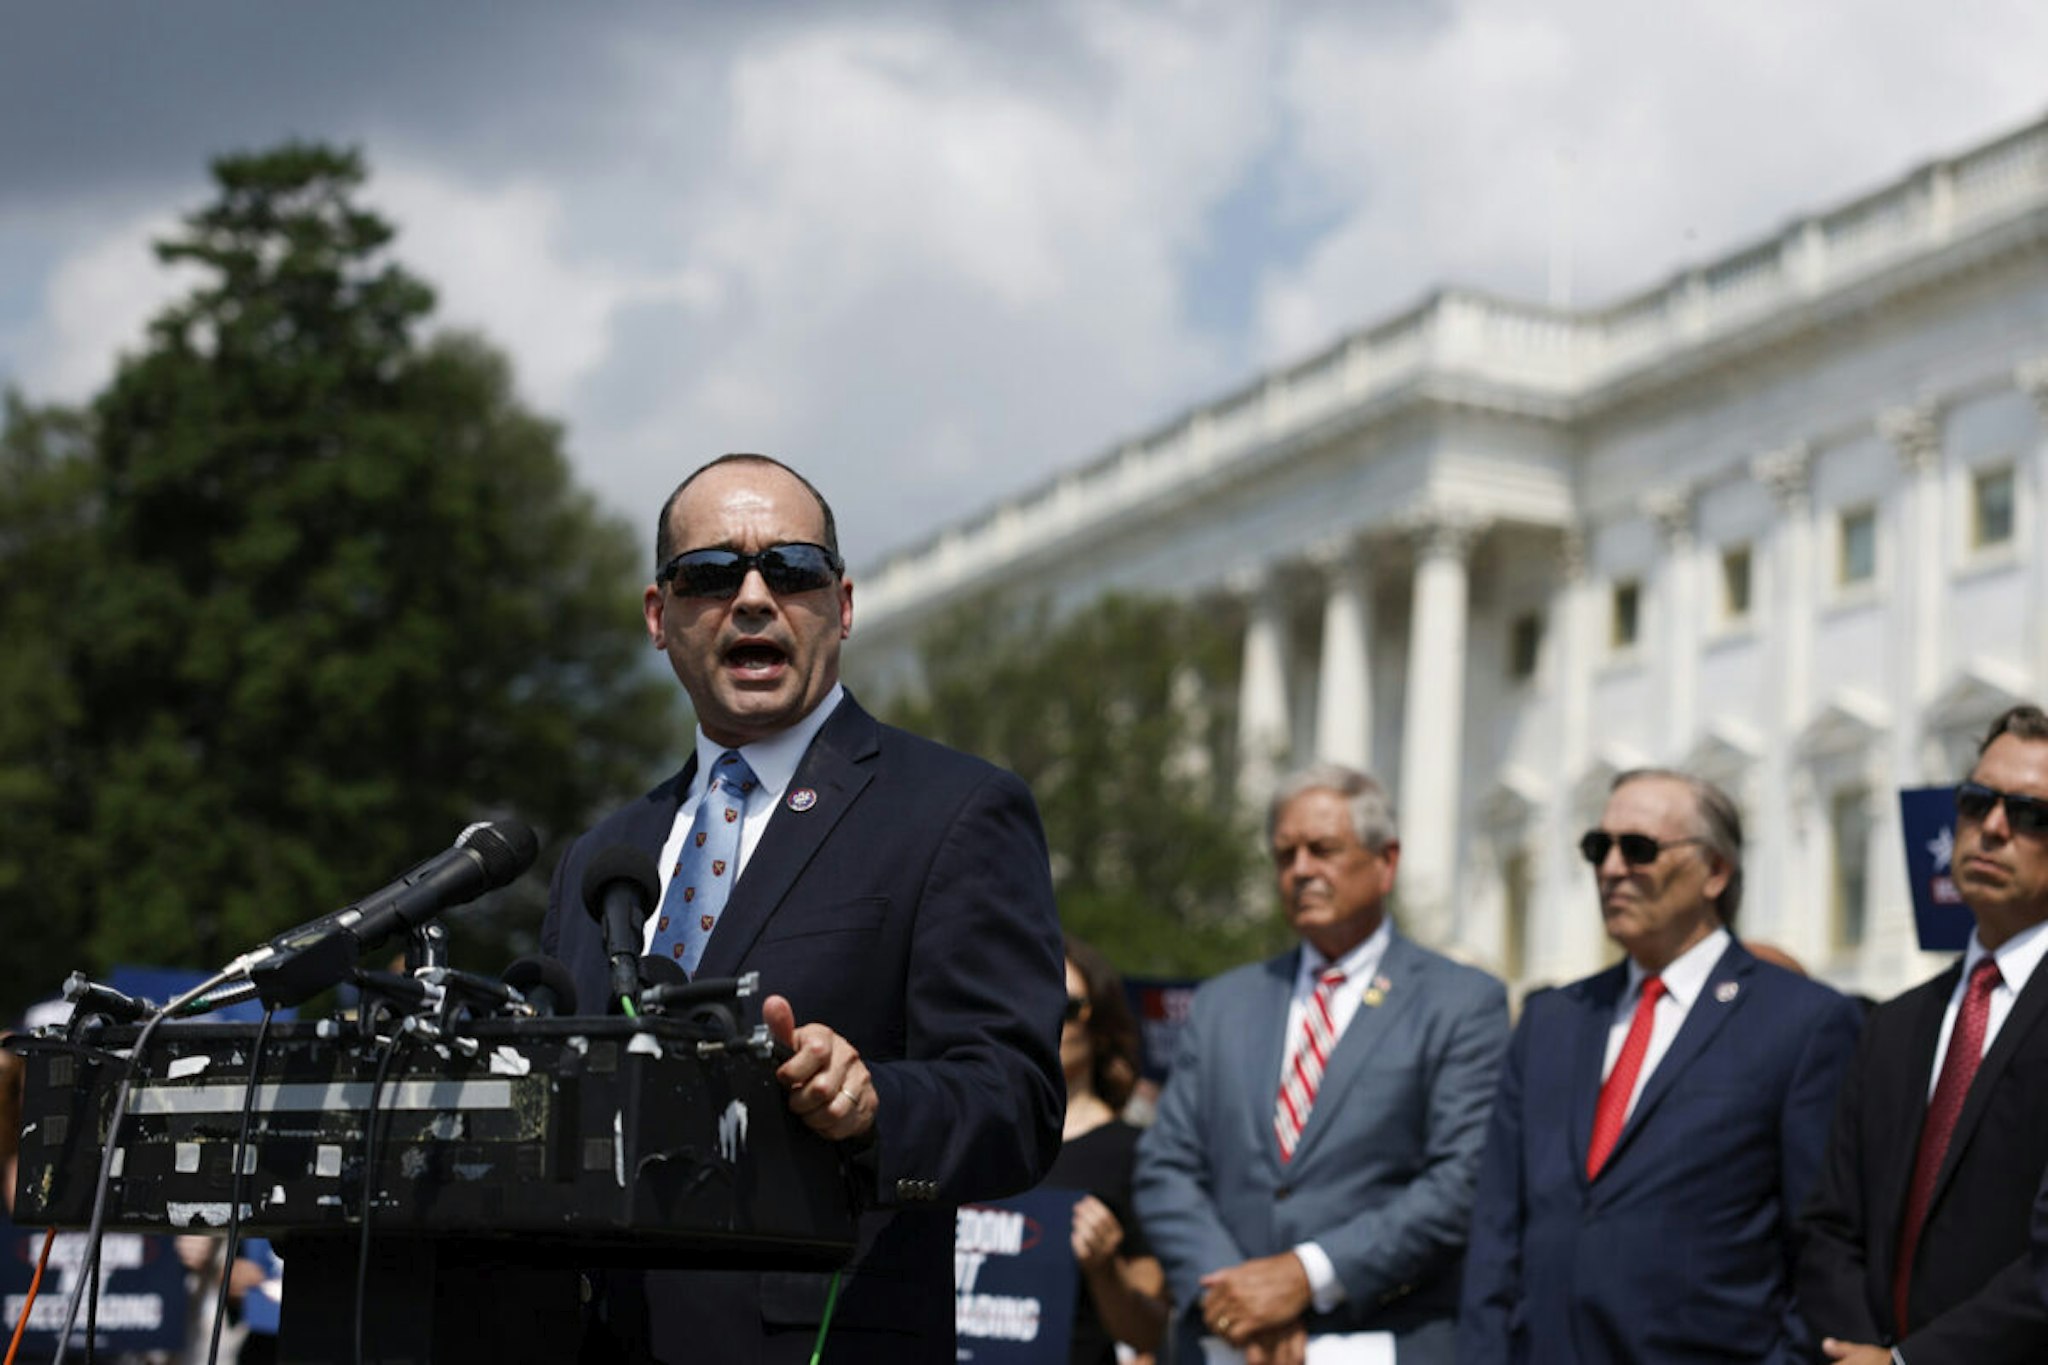 Rep. Bob Good (R-VA) speaks at a news conference on the progress of the Fiscal Year Appropriation Legislation outside the U.S. Capitol Building on July 25, 2023 in Washington, DC.